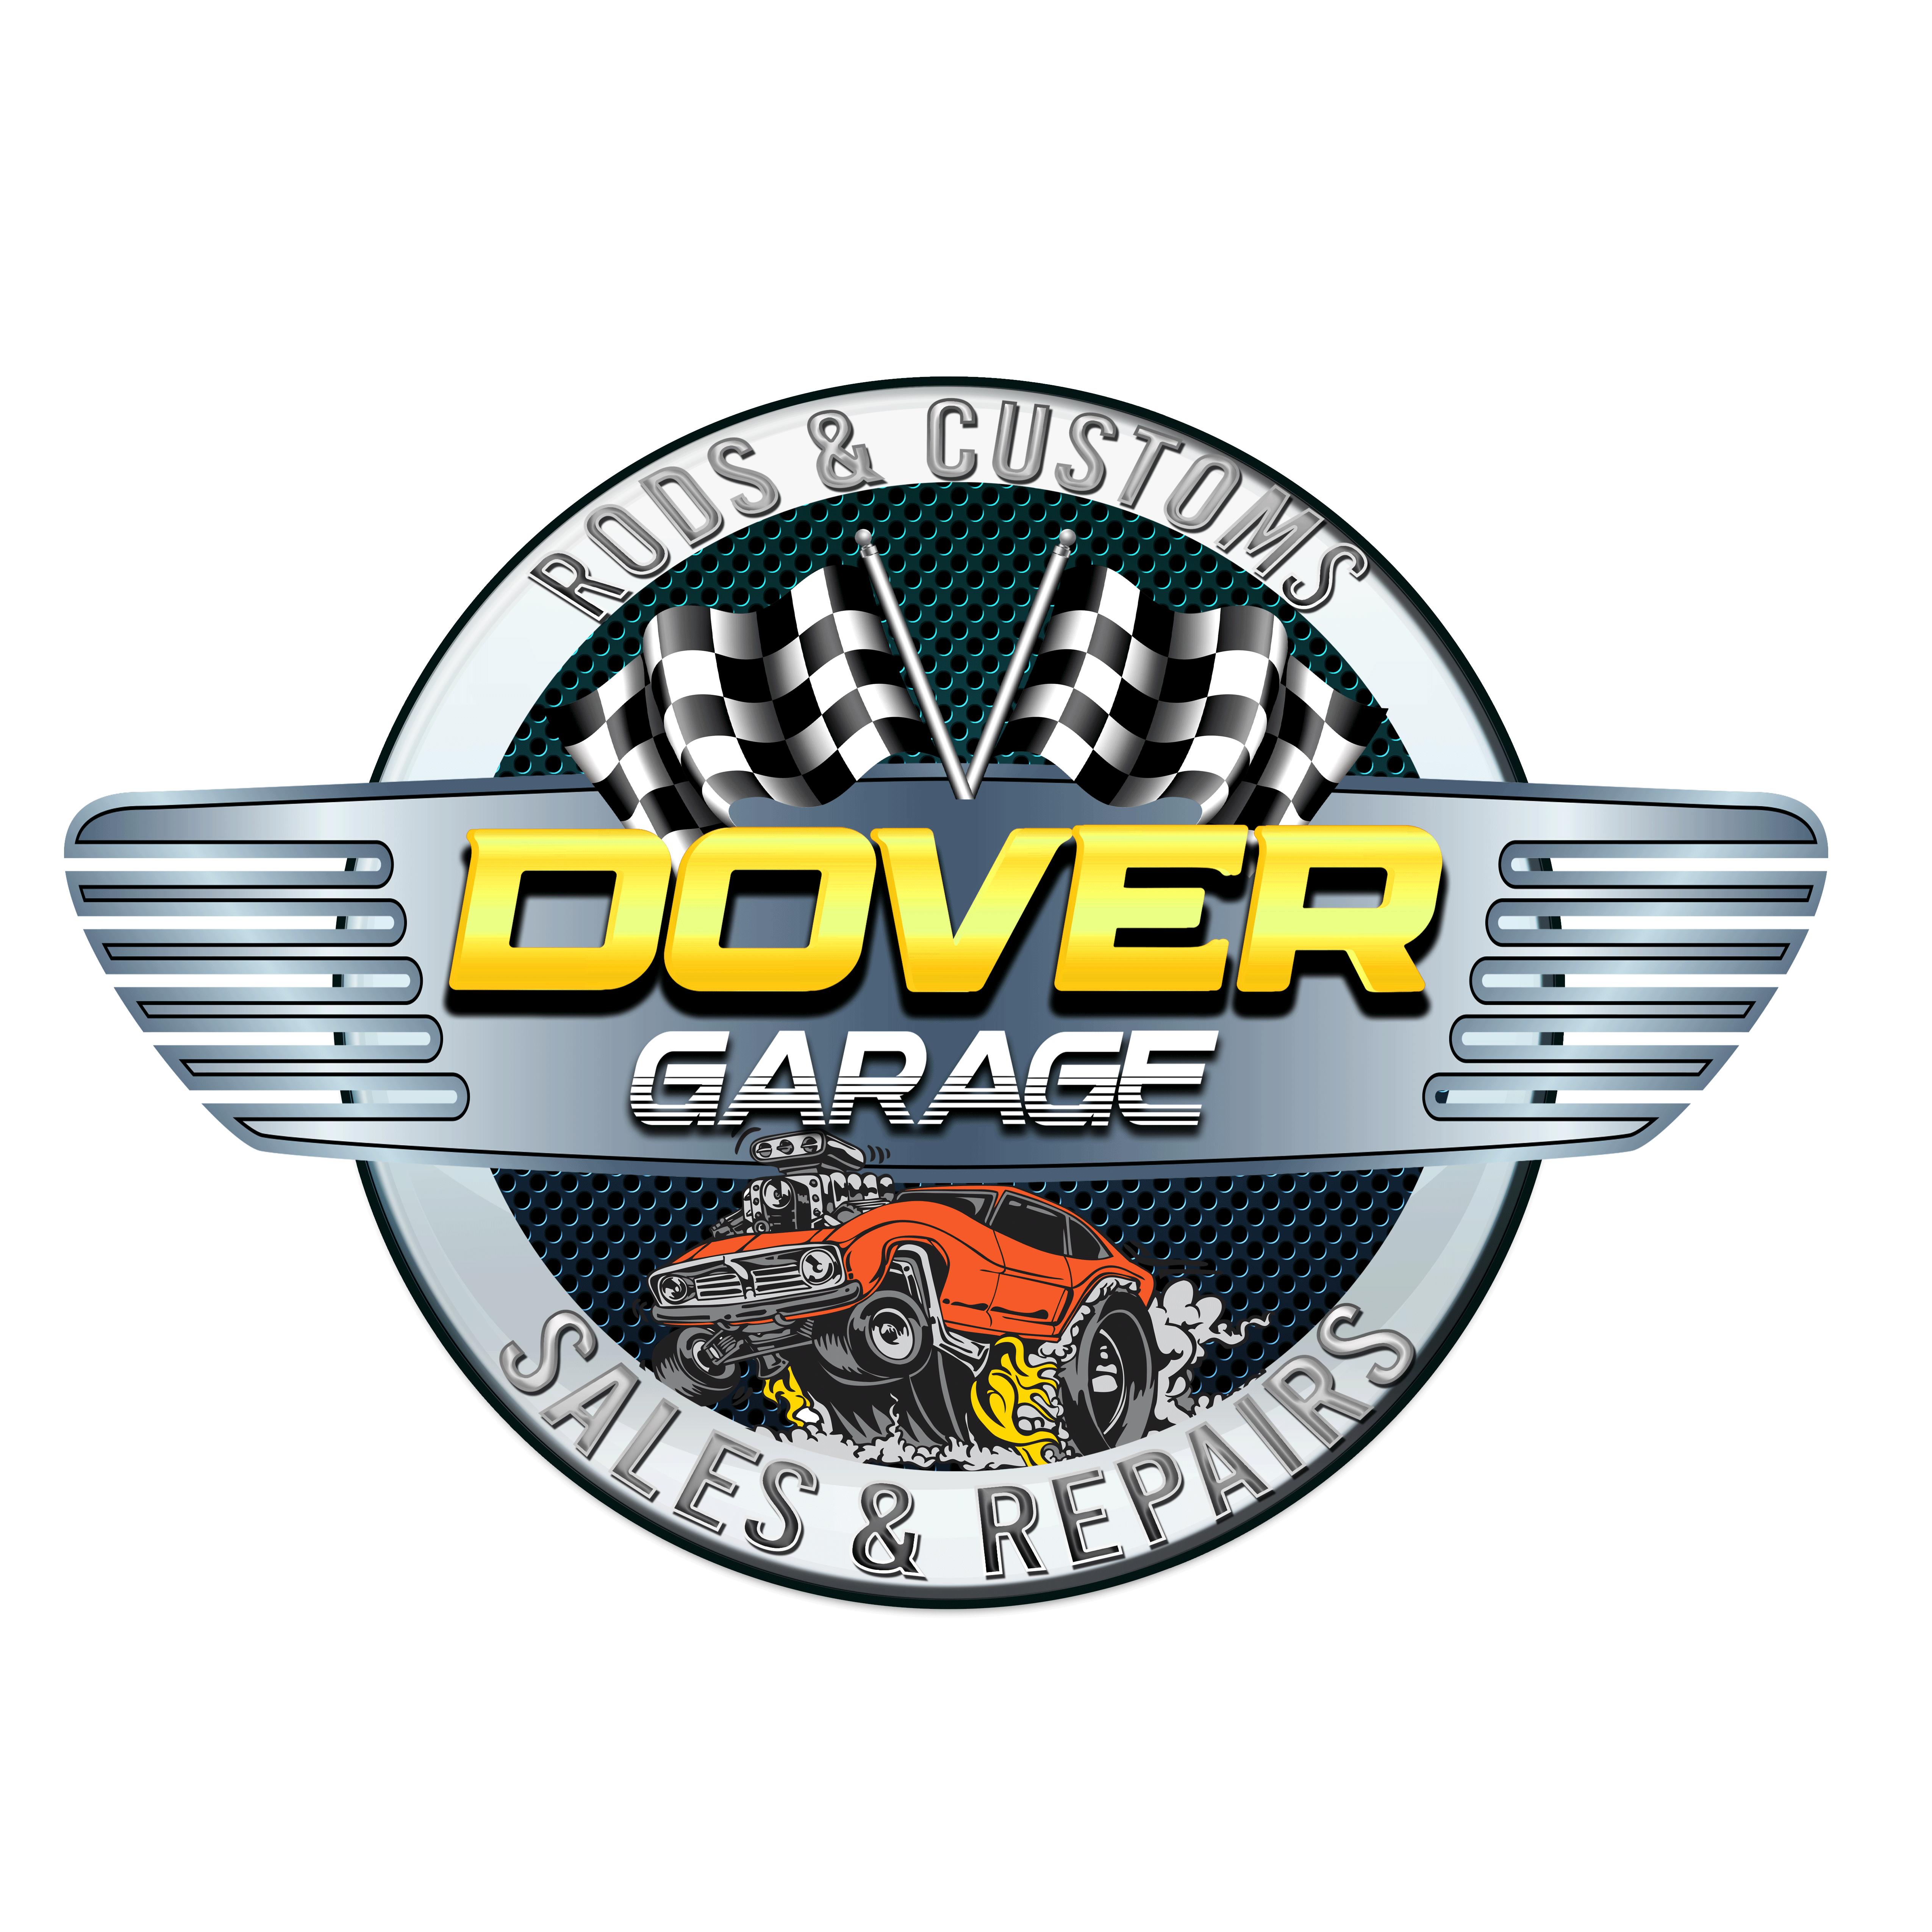 The Dover Garage